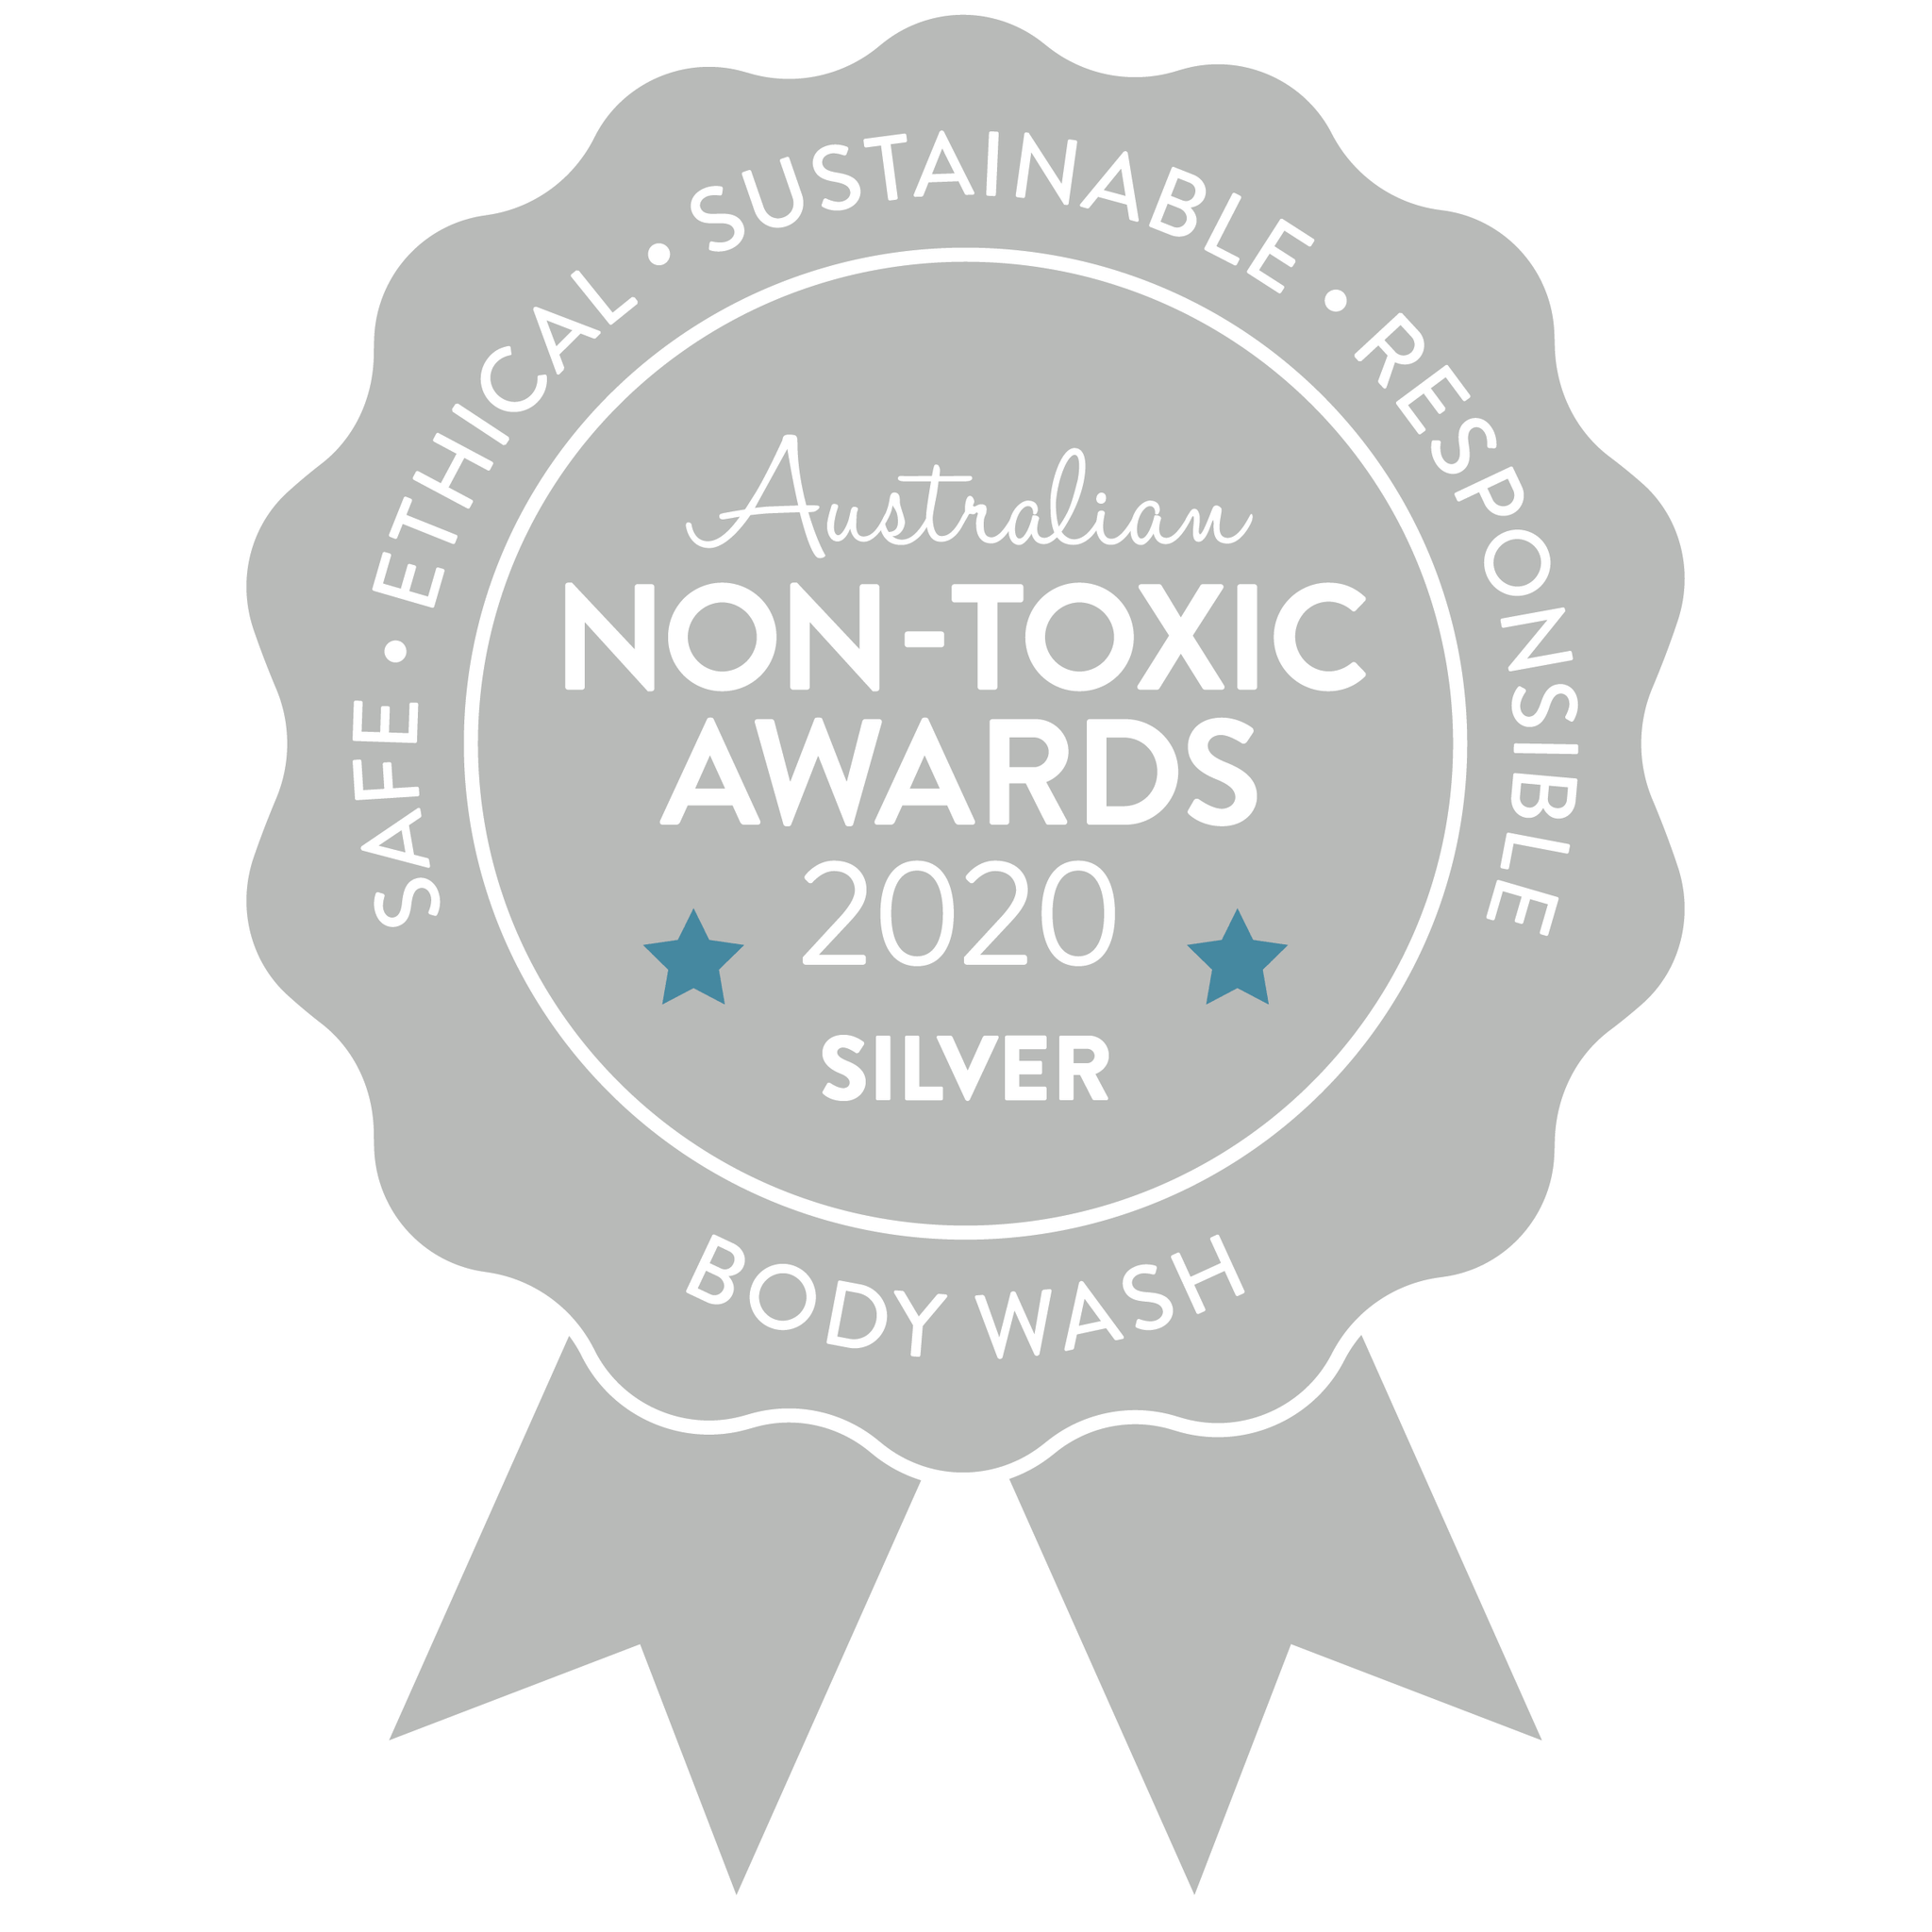 ORGANIC BEAUTY BRANDS, AUSTRALIA, 2020  SOOTHING OIL WASH: Best Body Wash  AUSTRALIAN NON-TOXIC AWARDS: 2020  SOOTHING OIL WASH: 2nd Best Body Wash  ORGANIC BEAUTY BRANDS AUSTRALIA  SOOTHING OIL WASH: Best Clean product of the Year, 2021